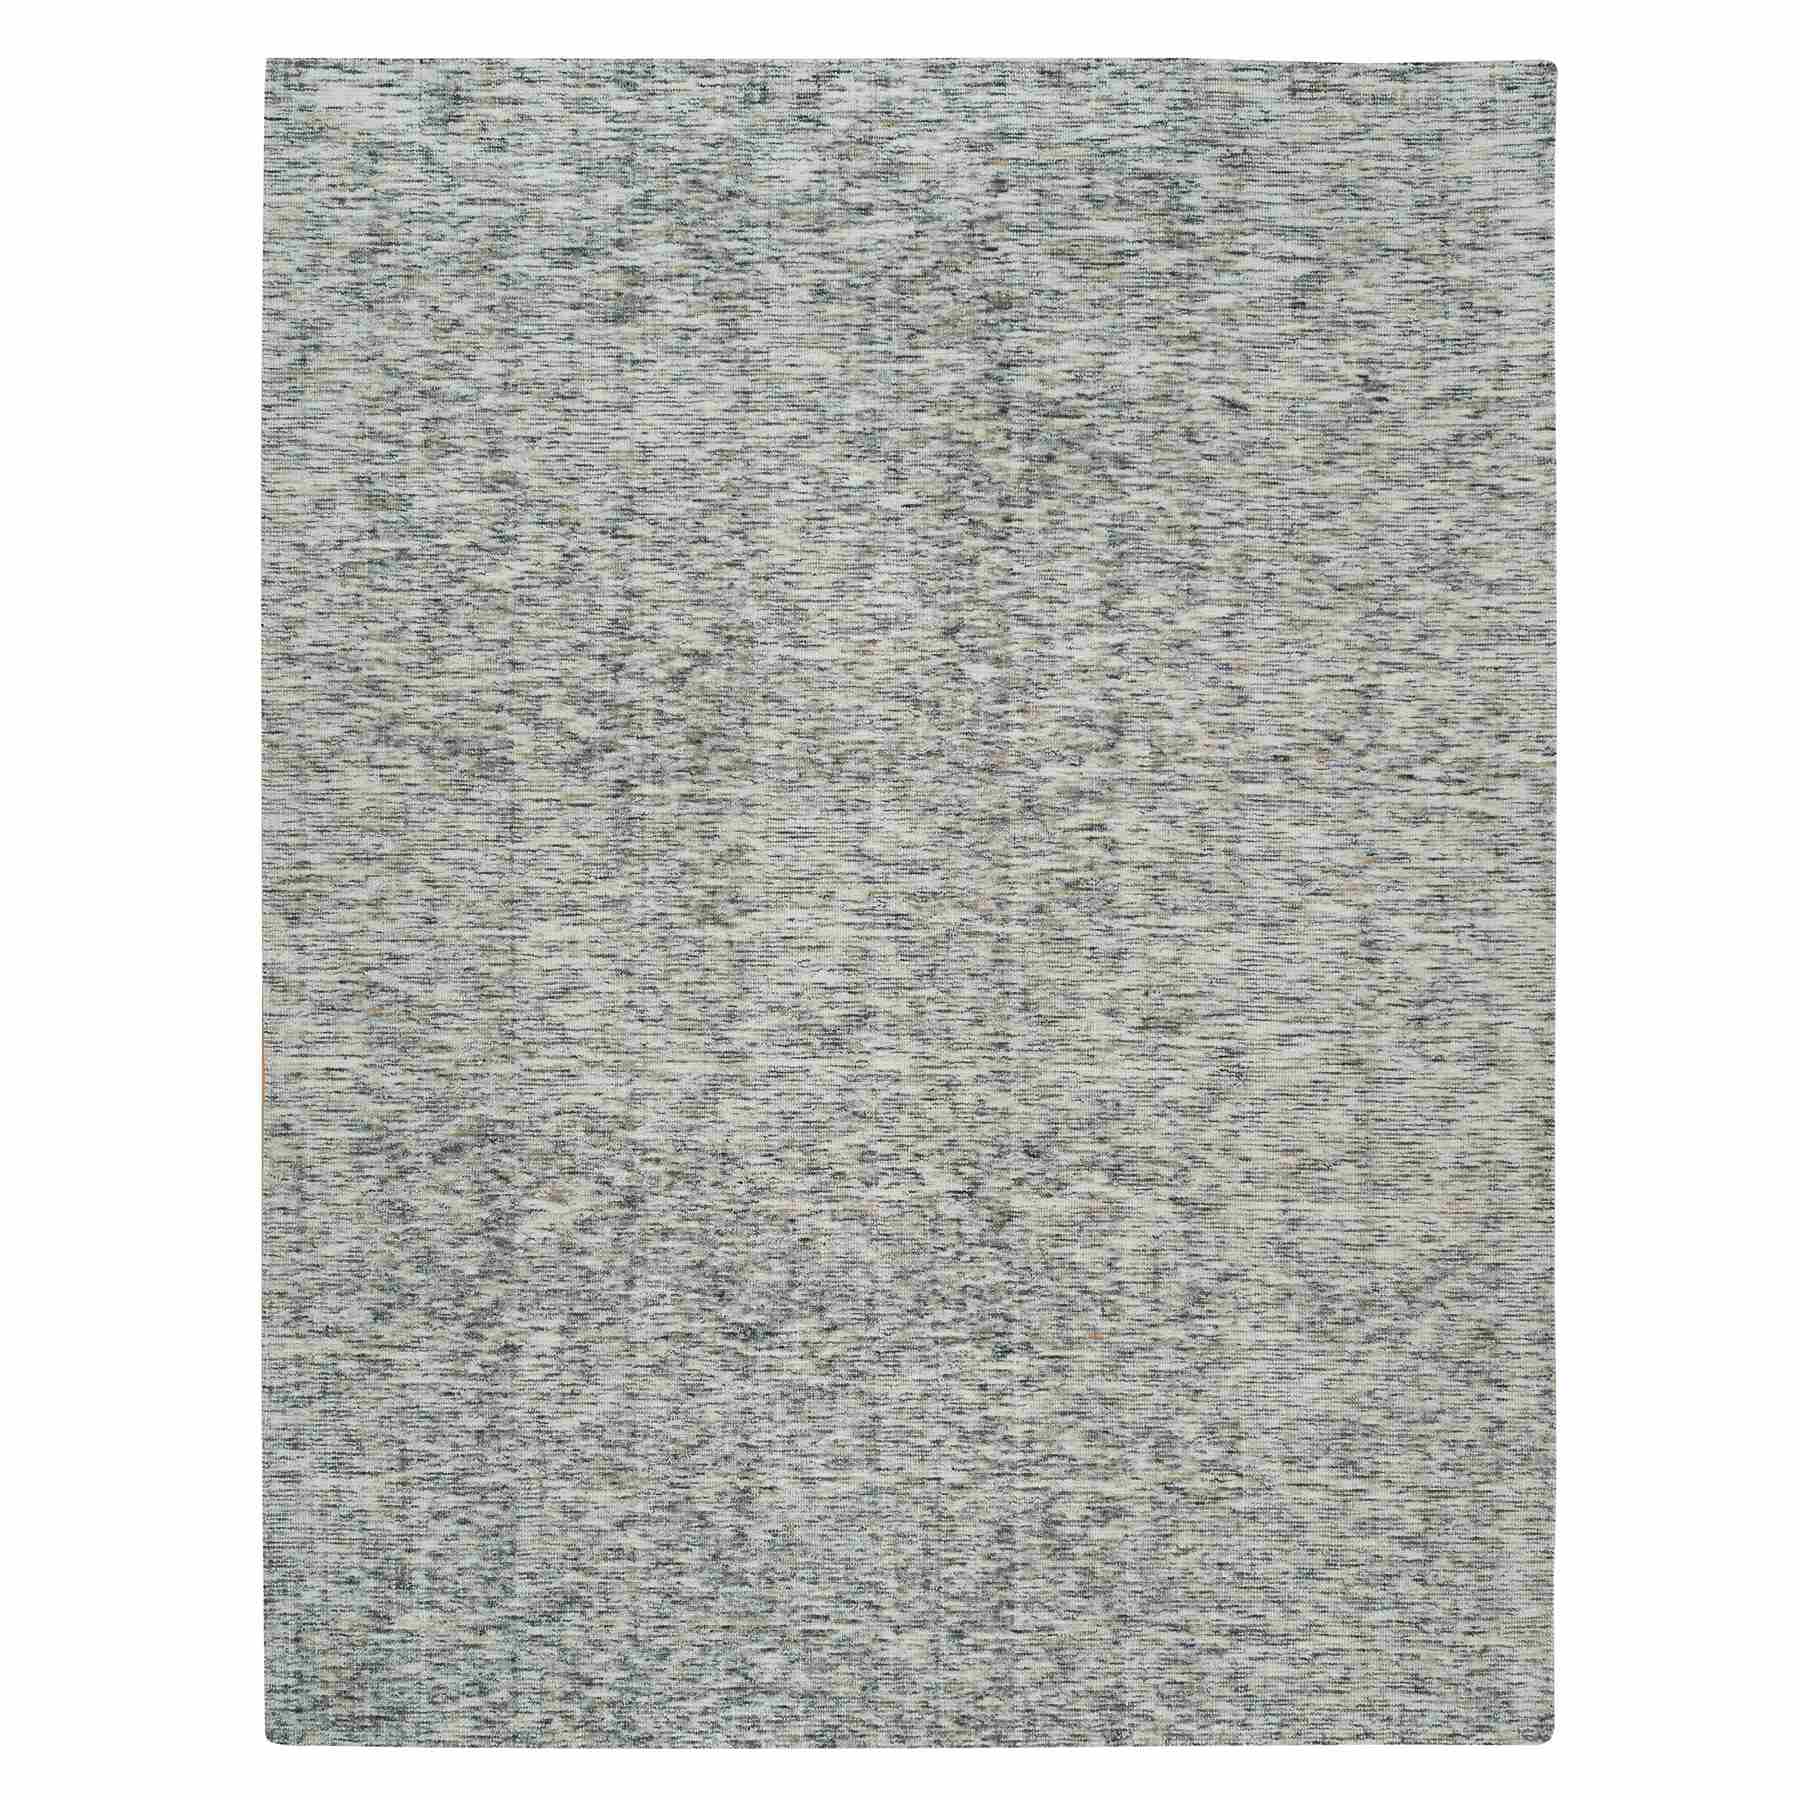 Earth Tone Colors, Pure Wool, Hand Loomed, Modern Striped Design, Soft to the Touch Oriental Rug